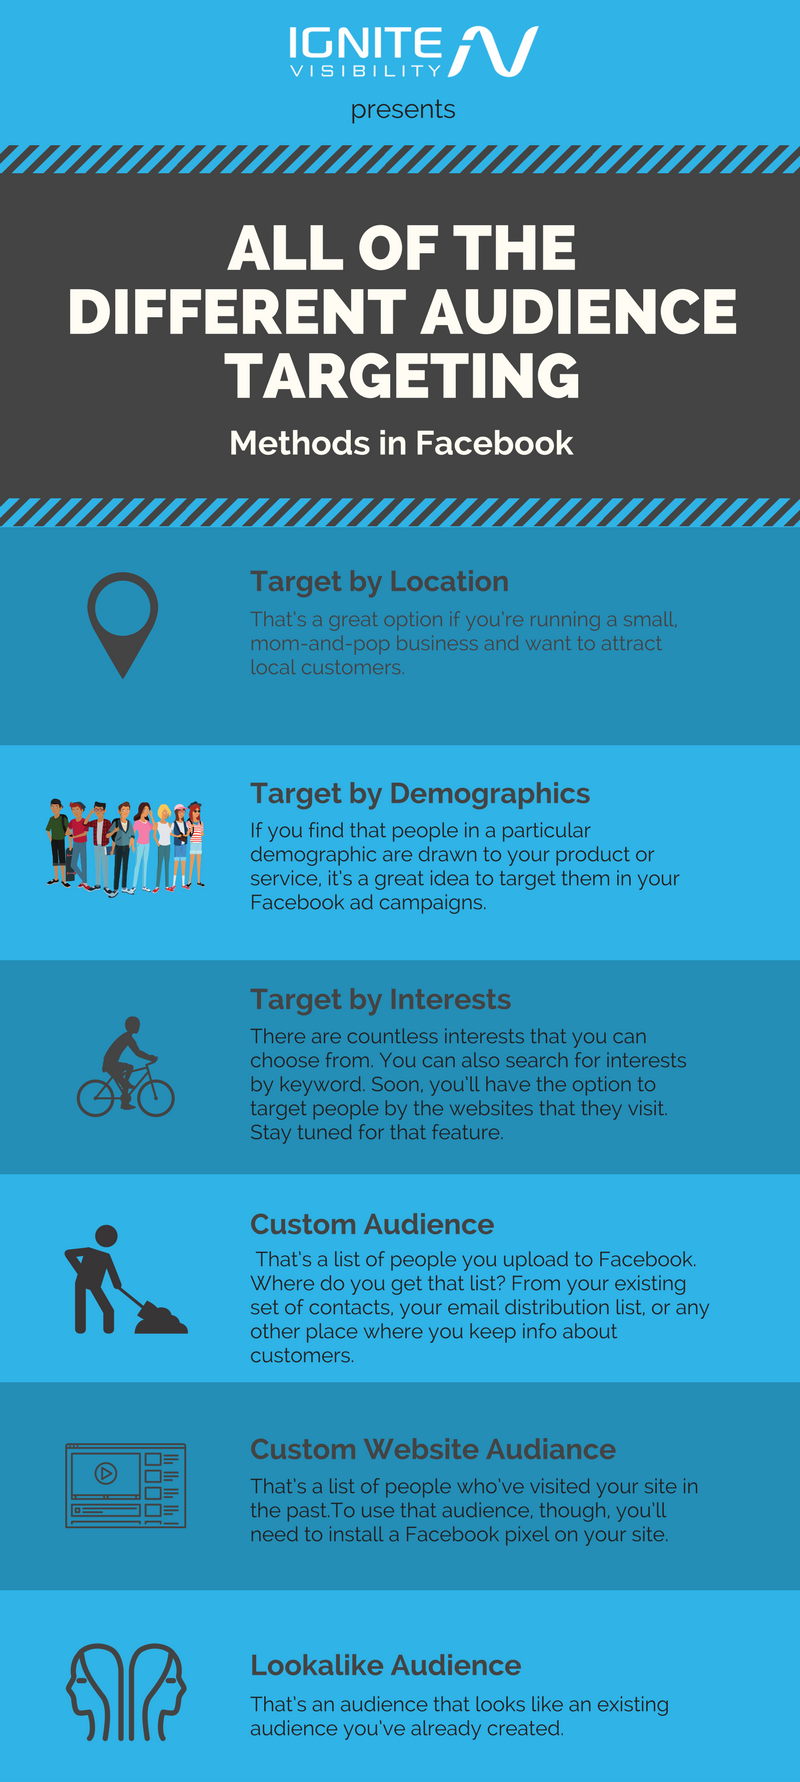 All the Different Audience Targeting Methods in Facebook